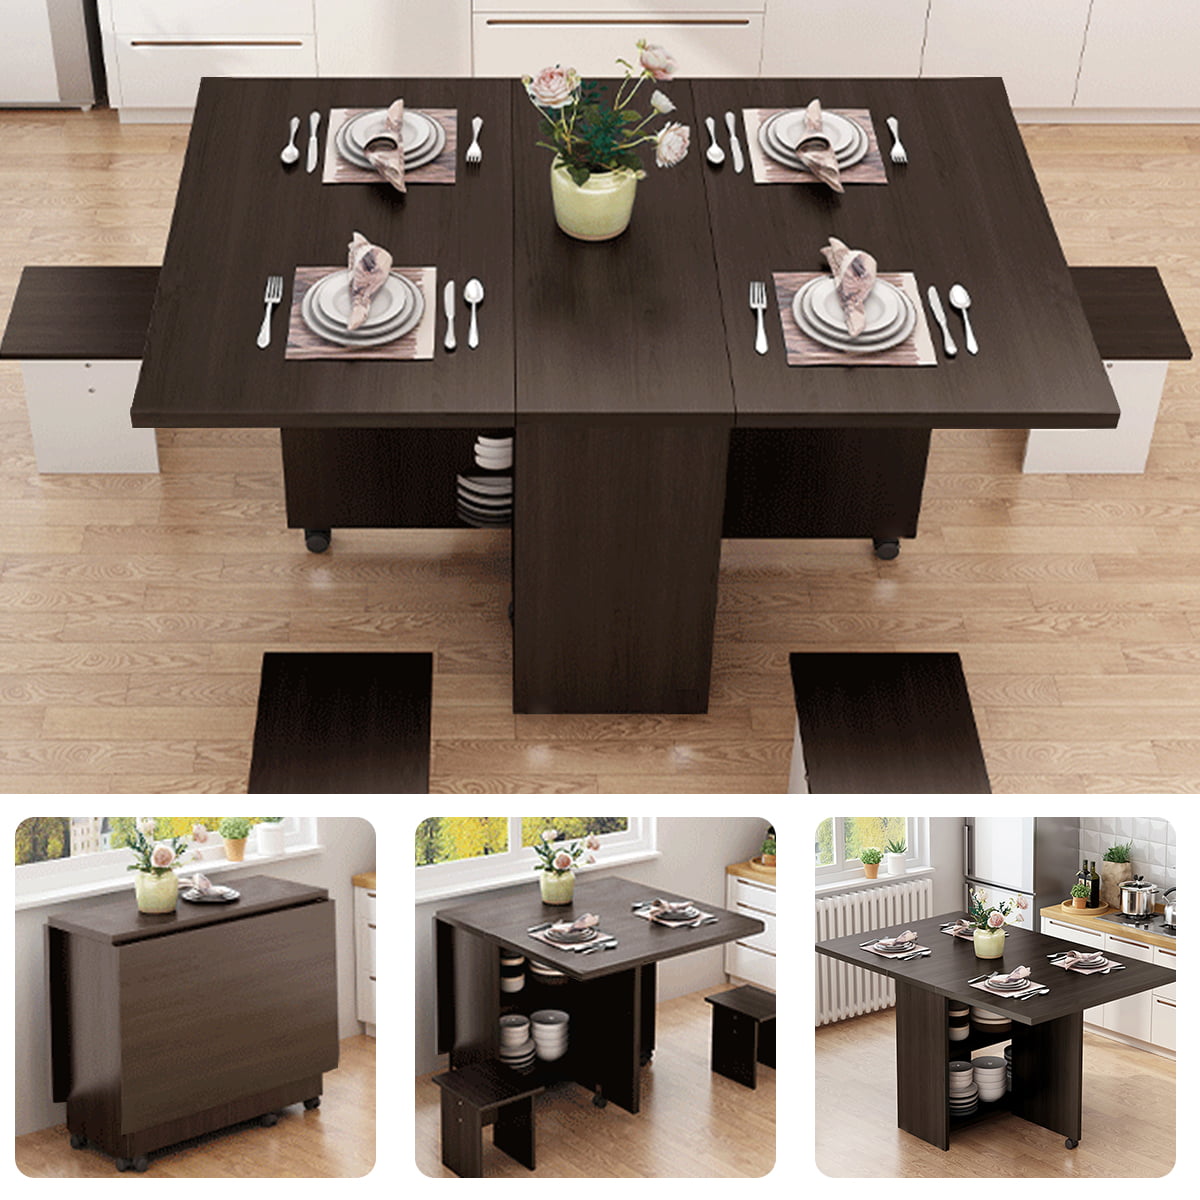 3 in 1 Folding Wooden Counter Dining Table With Wheels Saving Space for